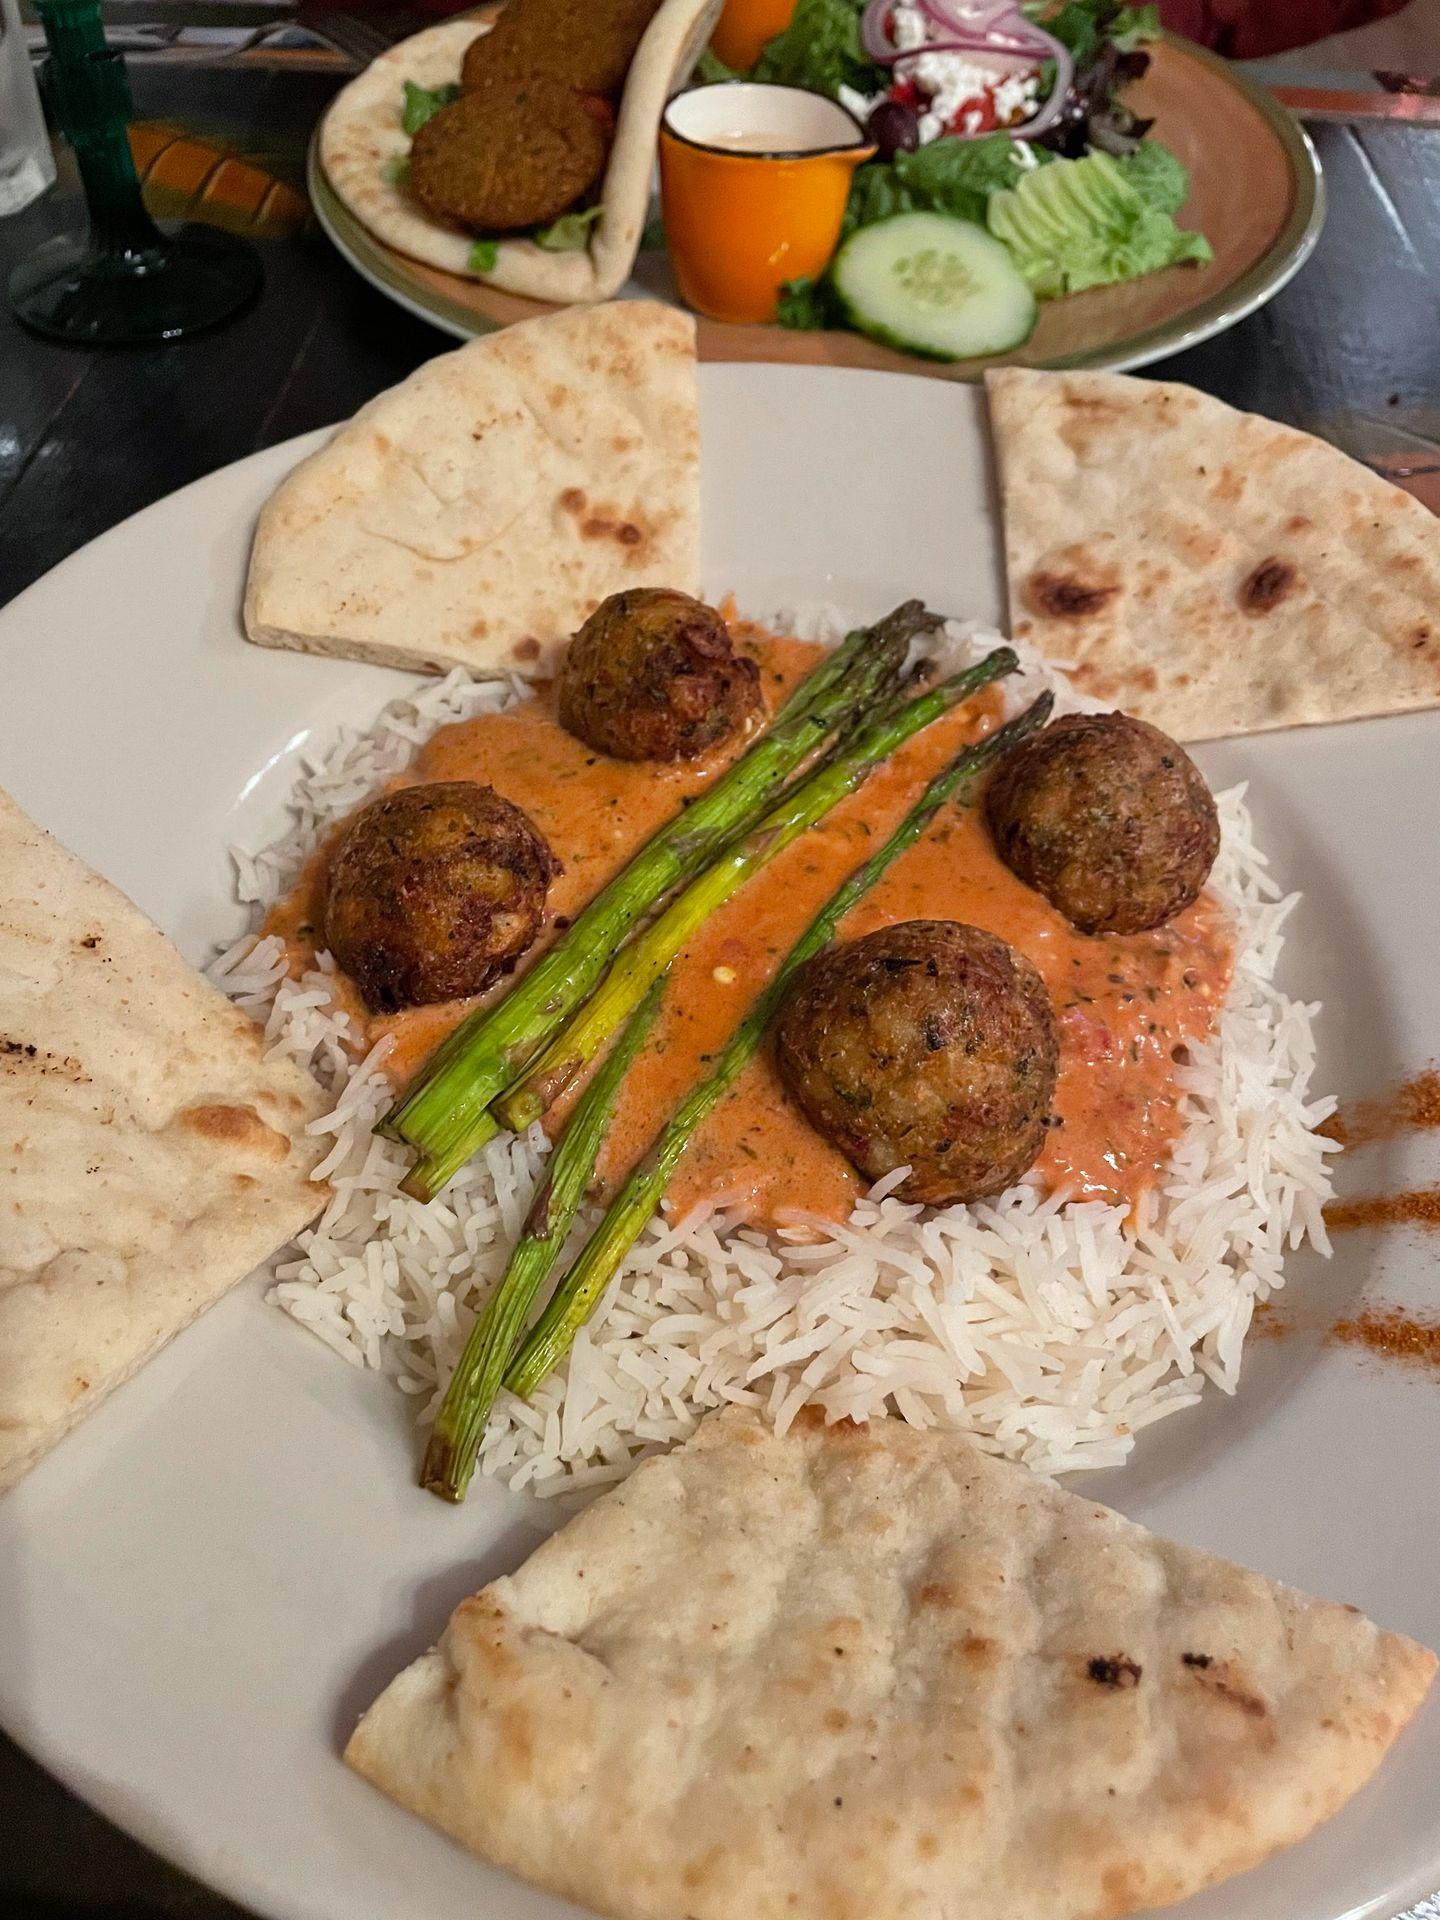 A plate of rice, pita bread, falafel and a red sauce from Gypsy Cafe.